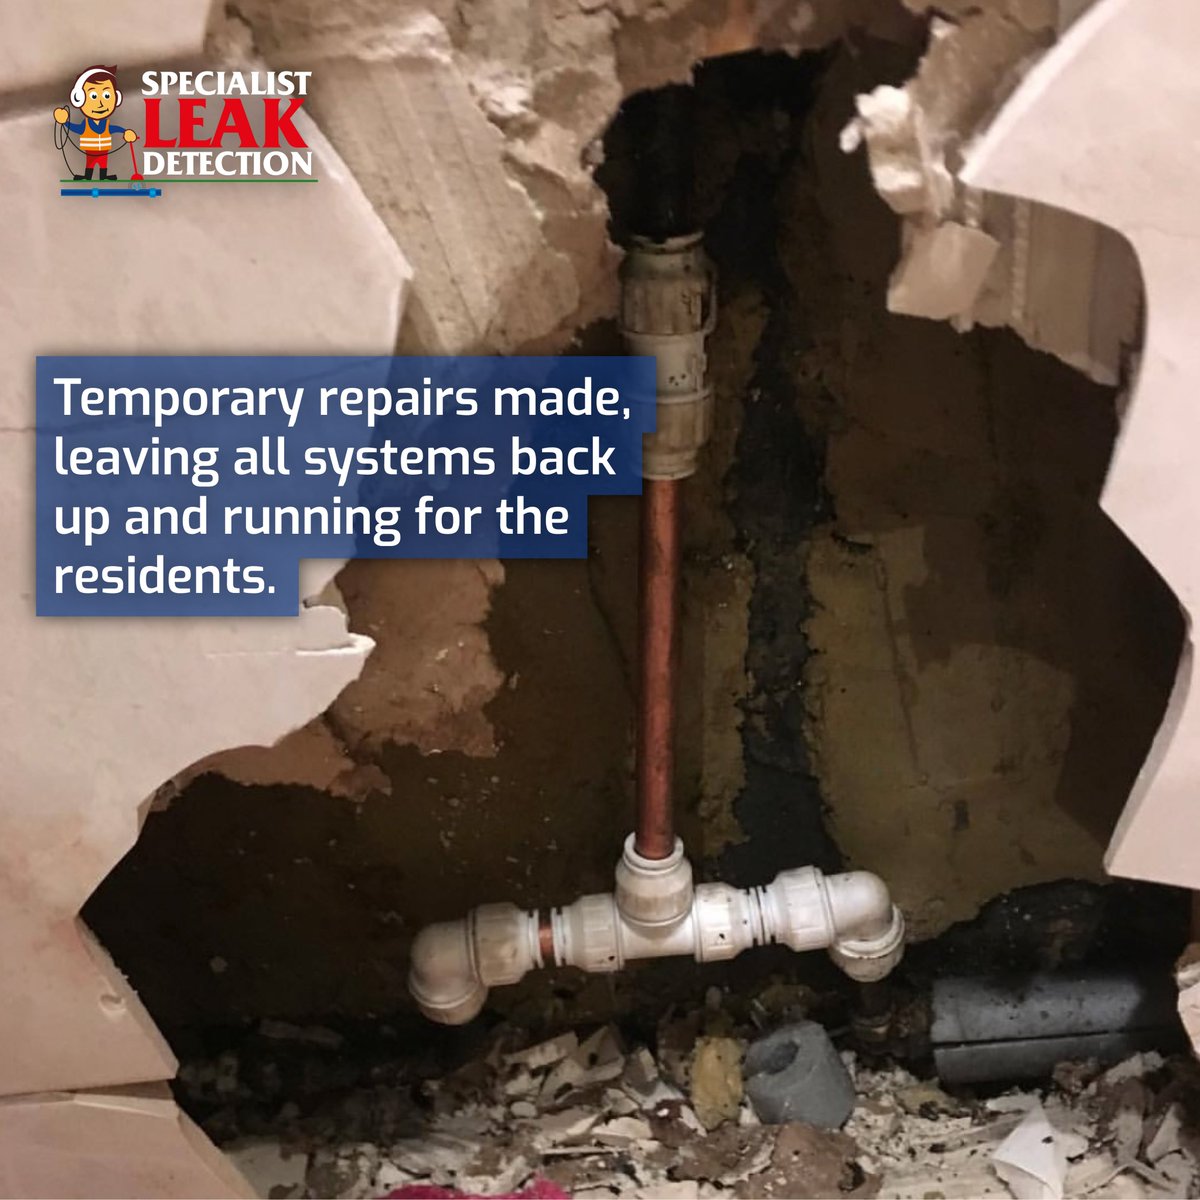 If you think you have a leak in your property, give us a call on:

☎️ 0800 414 8511

#leakdetection #leak #waterdamage #find #fix #repair #specialists #engineers #plumbers #detection #homeimprovement #happycustomers #jobdone #leakrepair #london #uk #south #handyman #services